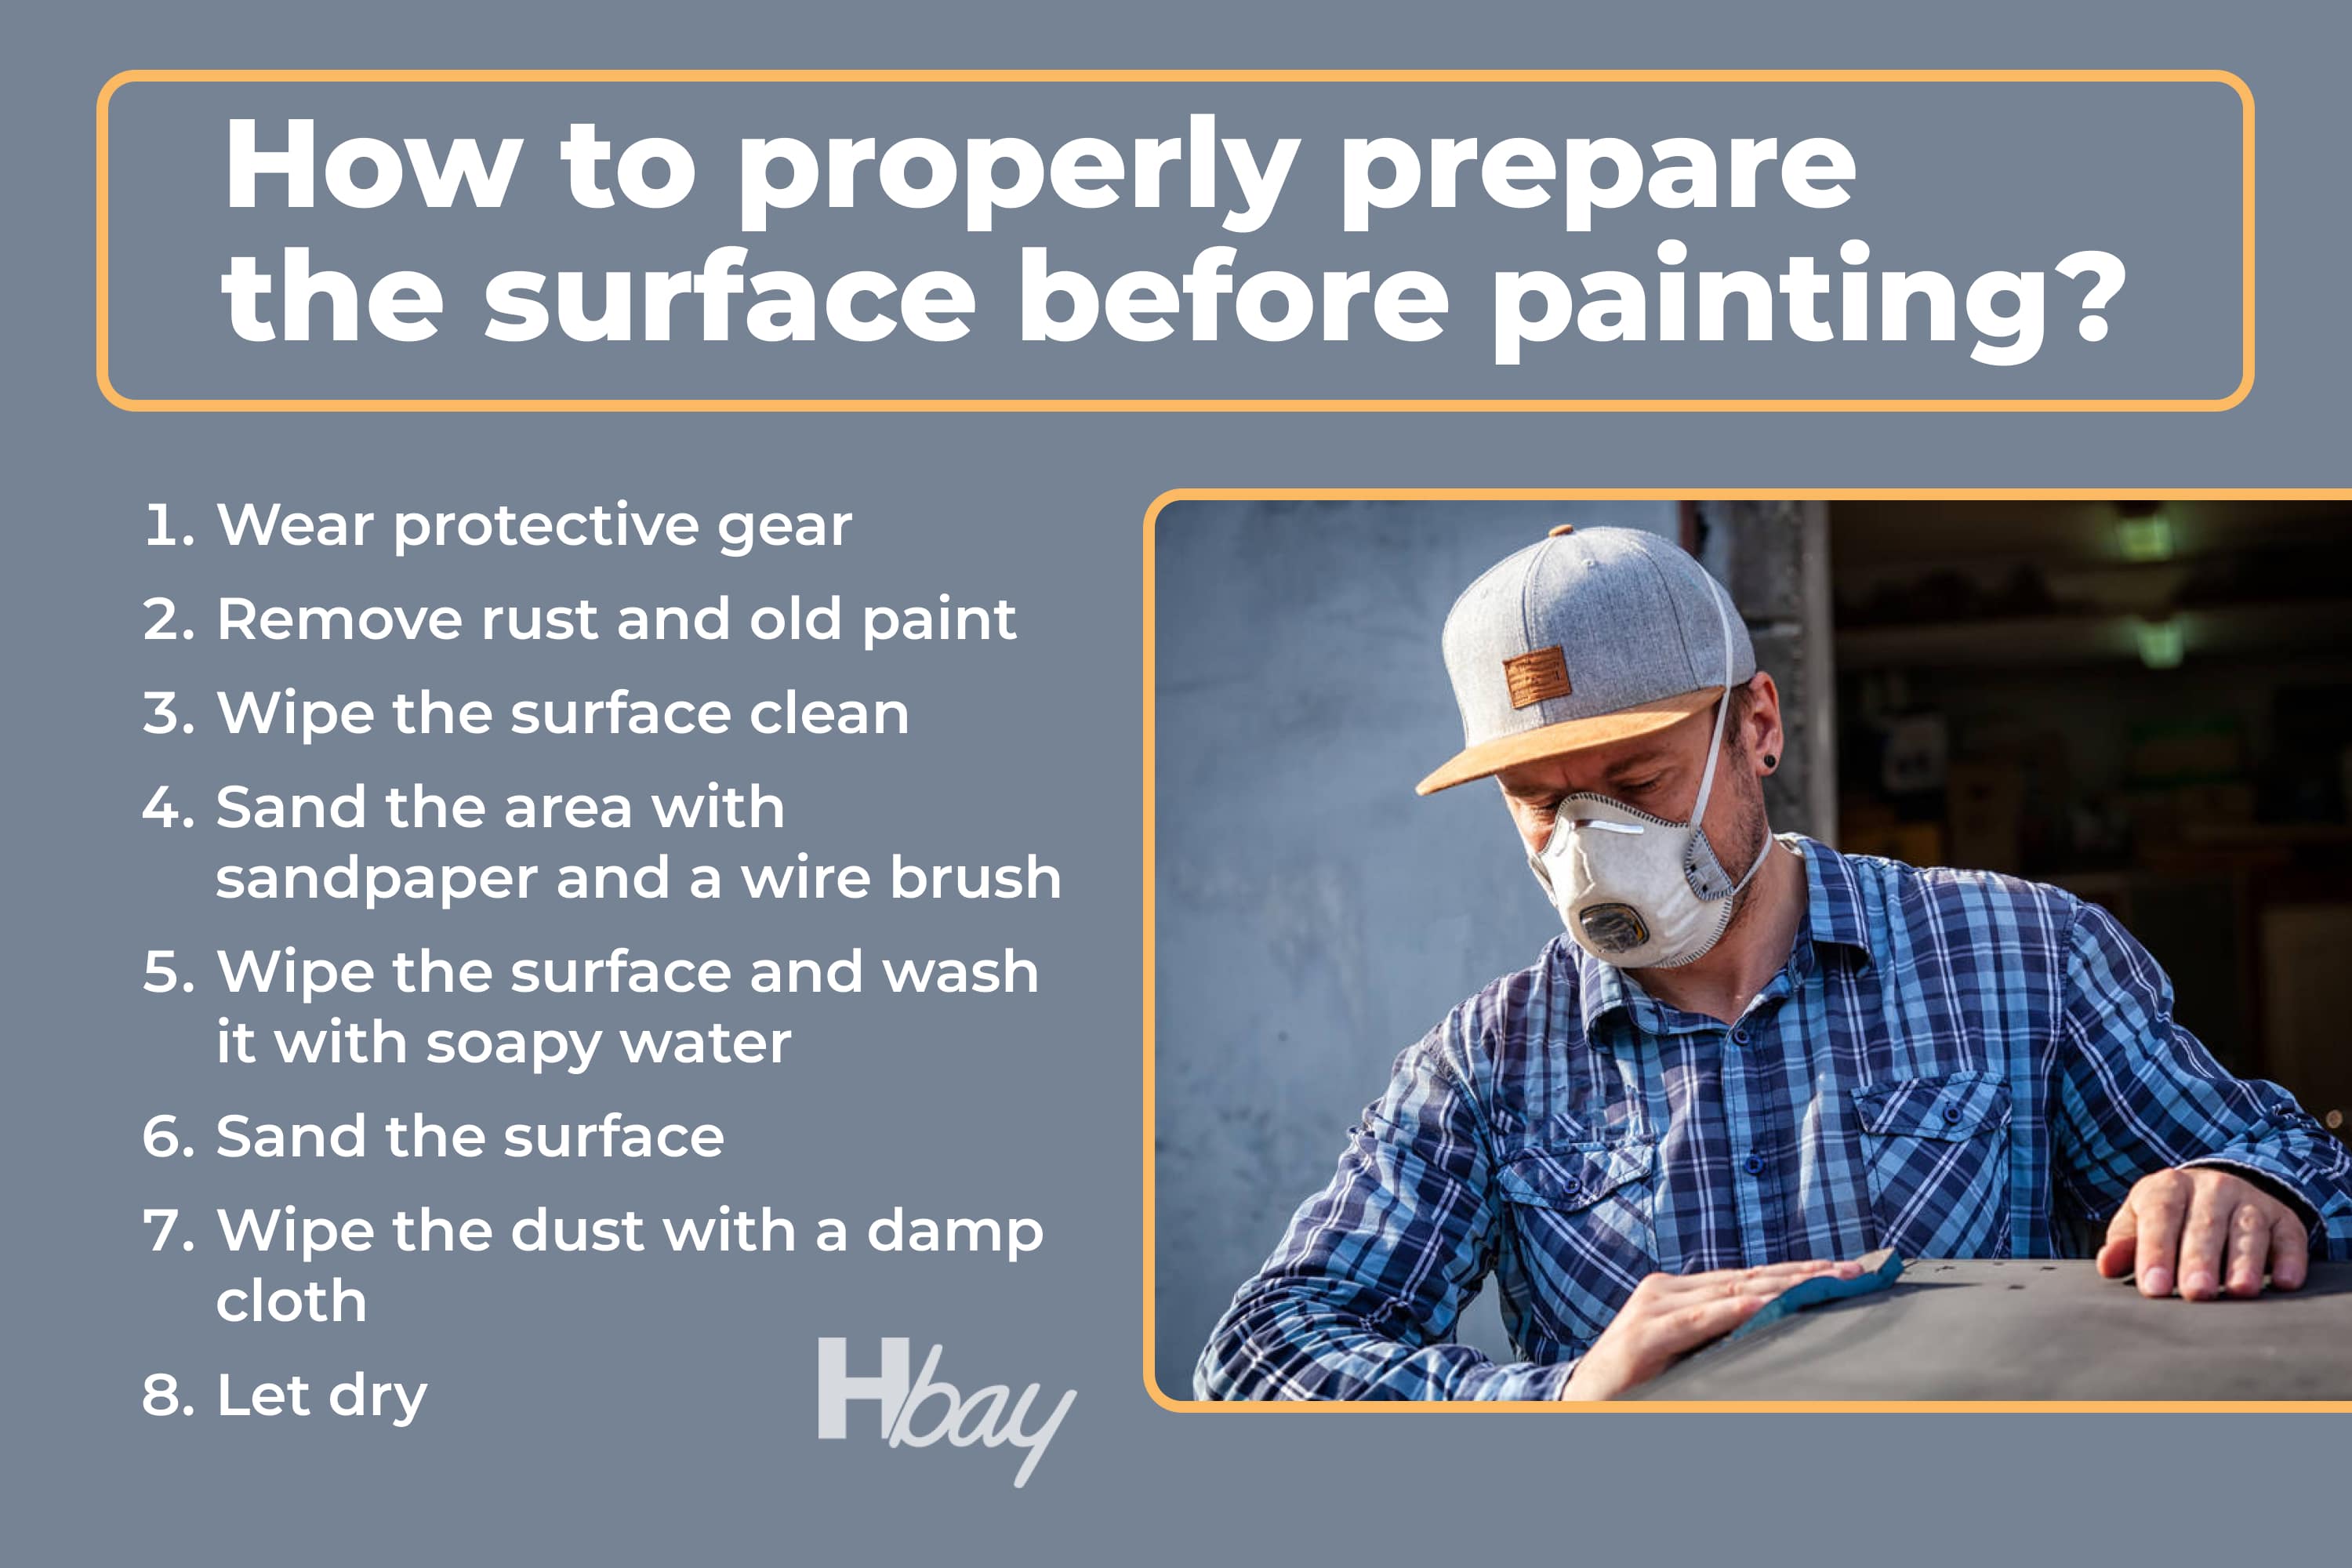 How to properly prepare the surface before painting